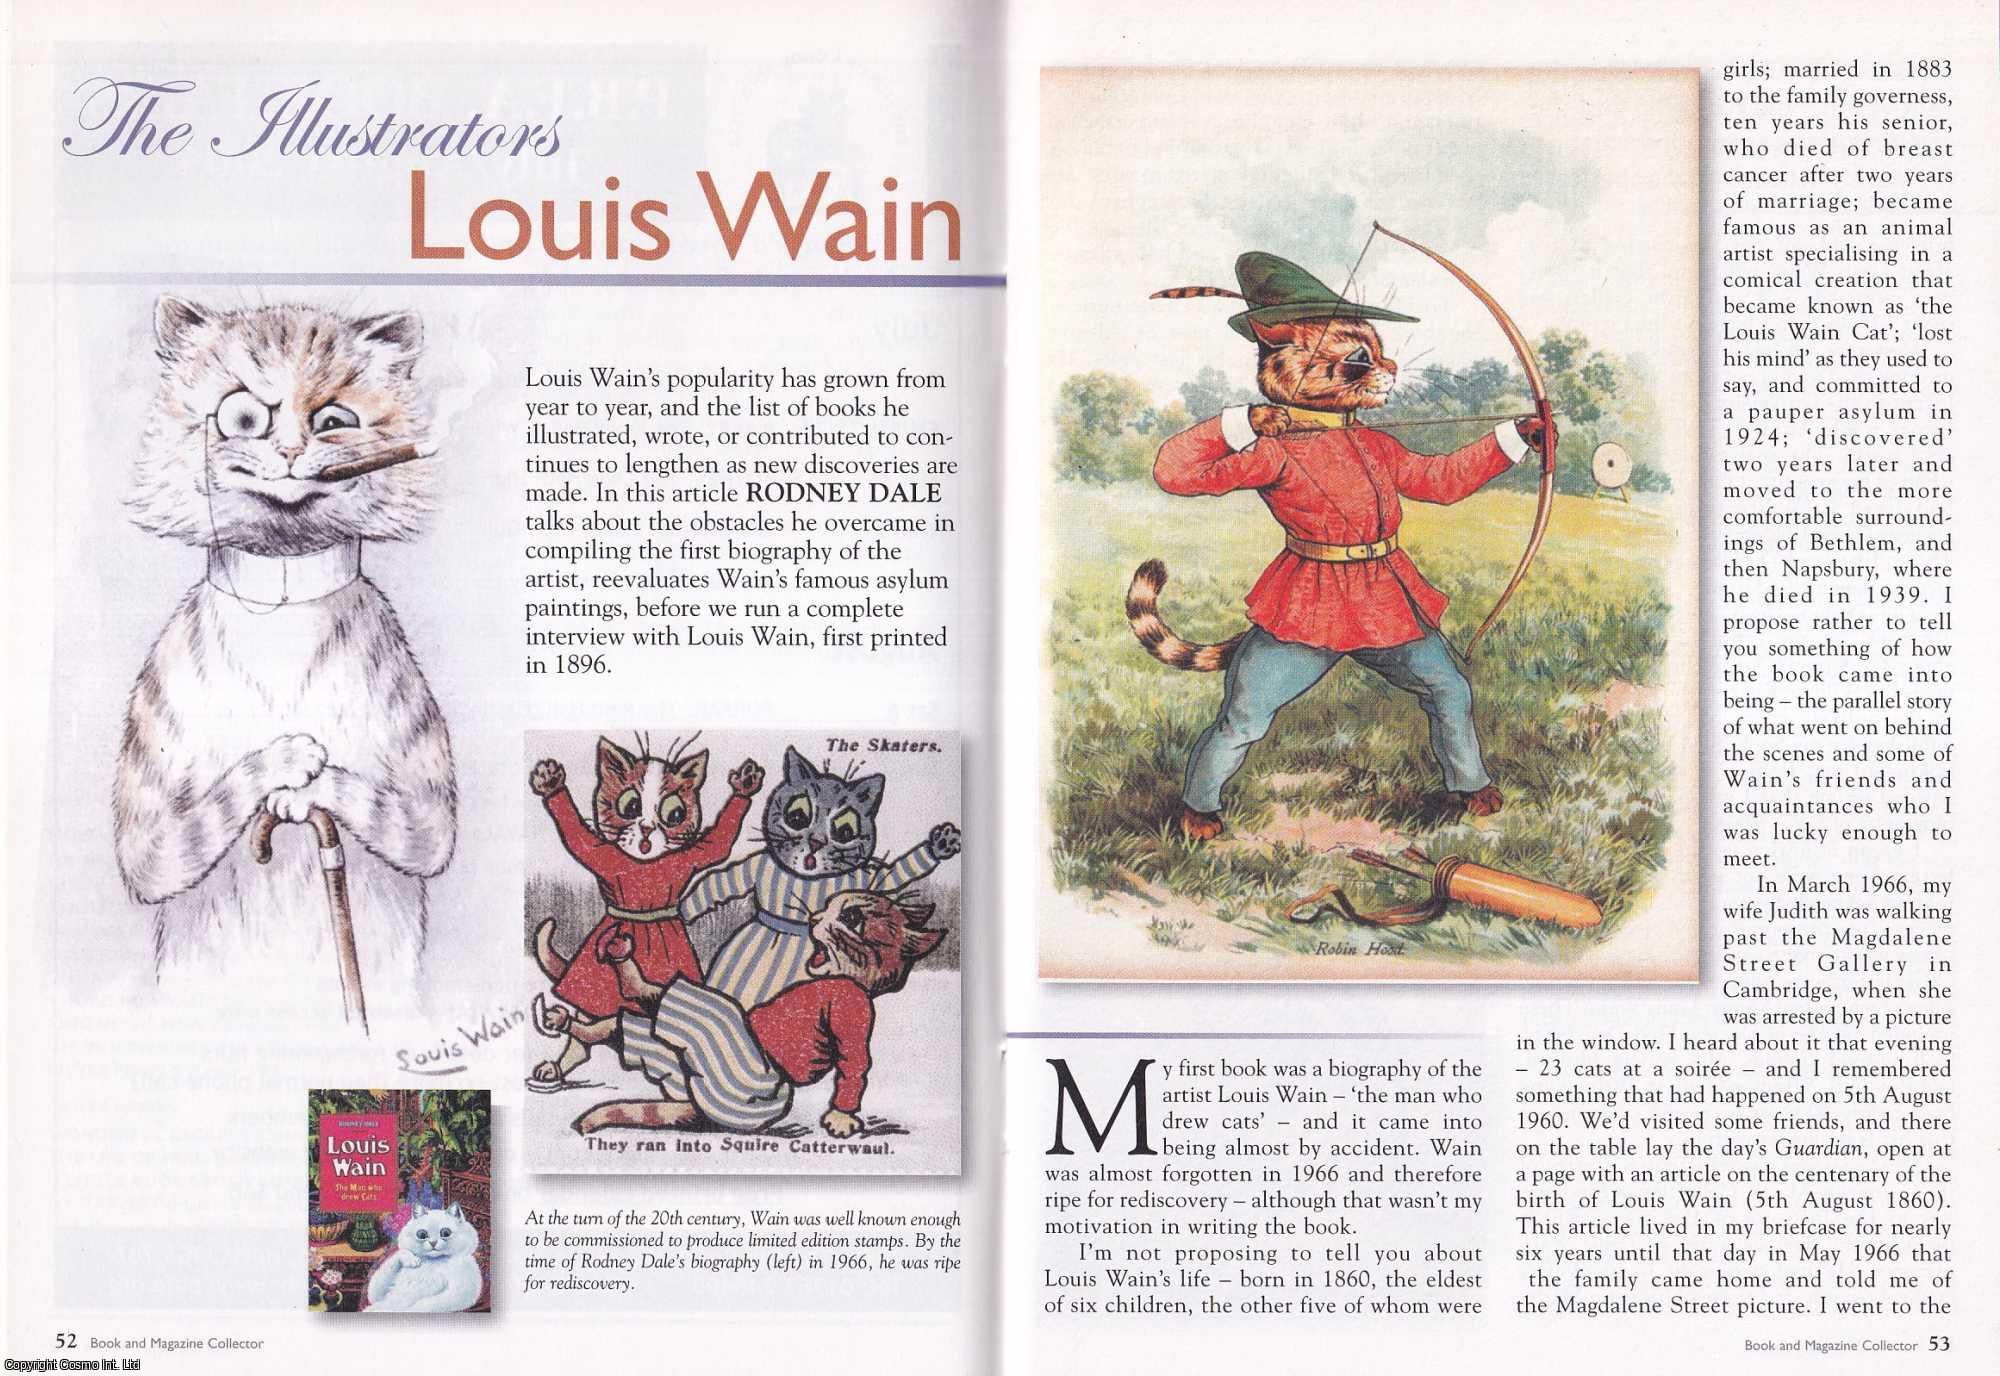 --- - Louis Wain. This is an original article separated from an issue of The Book & Magazine Collector publication.